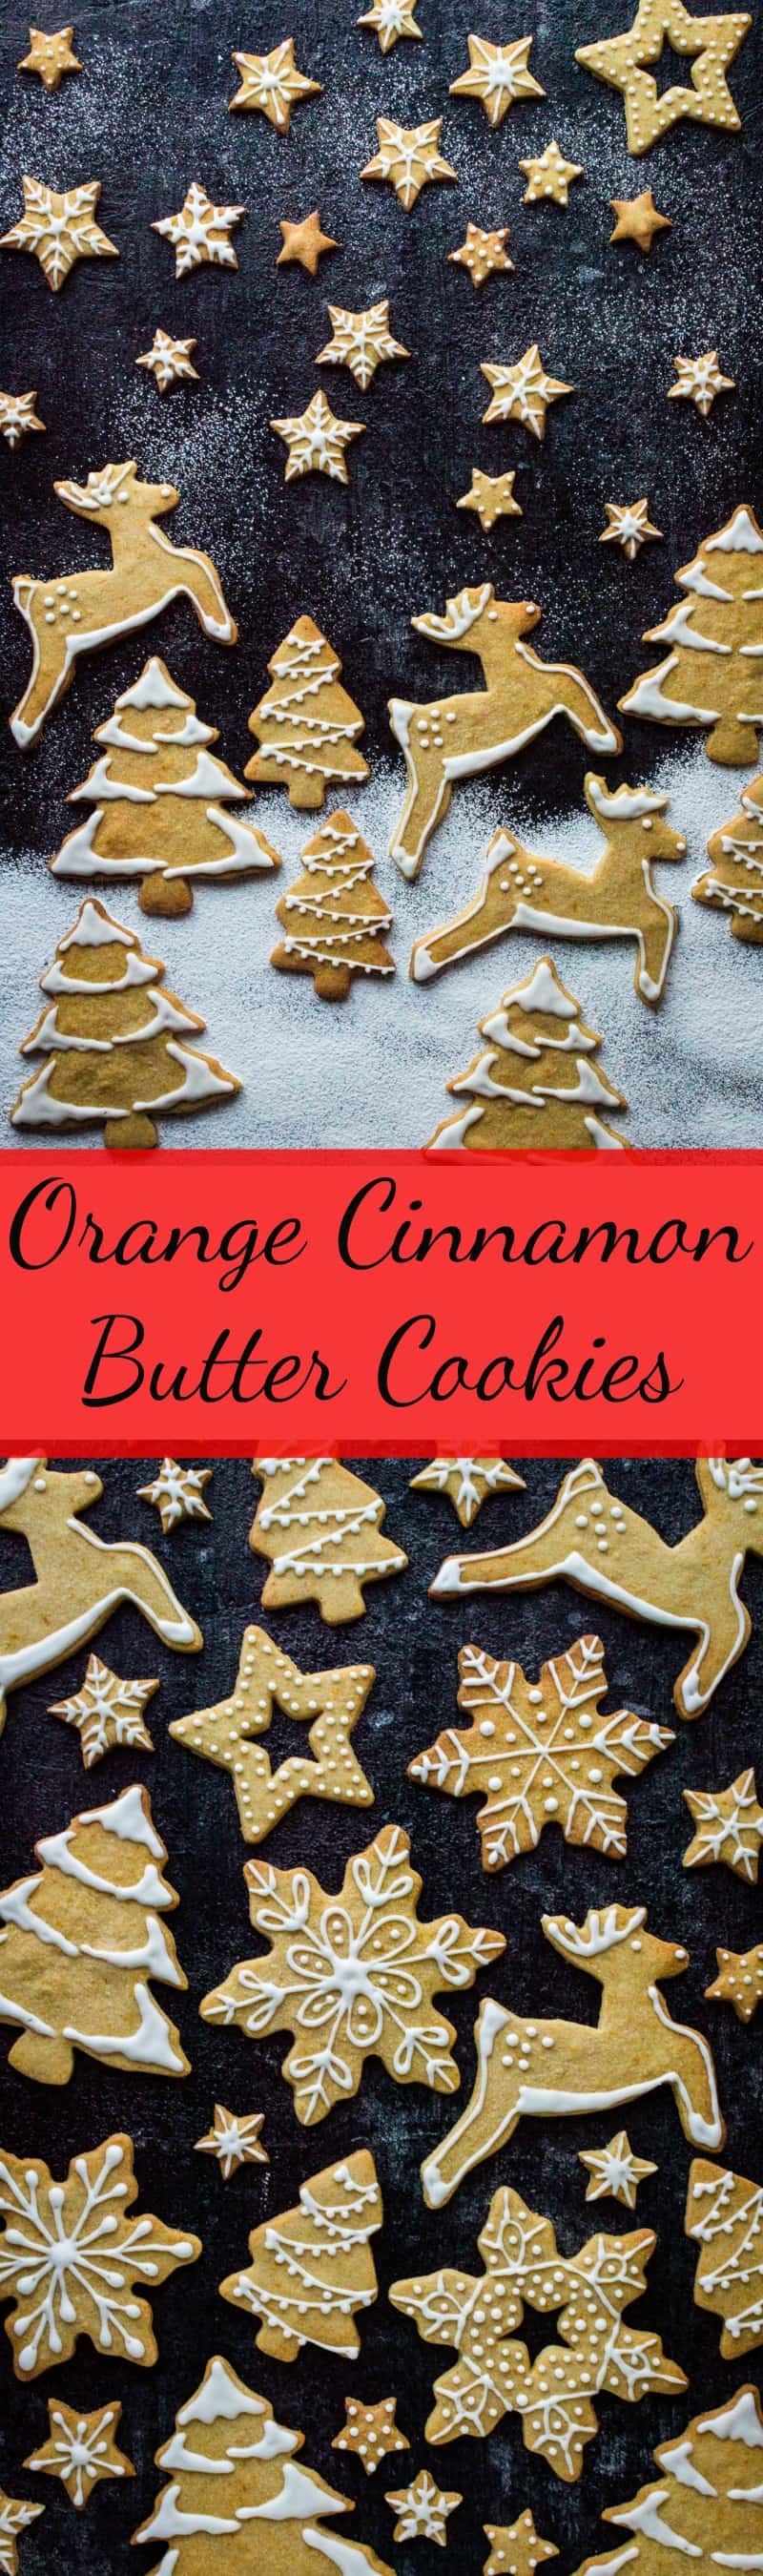 Orange cinnamon butter biscuits - crisp, buttery festive cookies that make great cut-outs for decorating and Christmas. #Christmas #baking #cookies